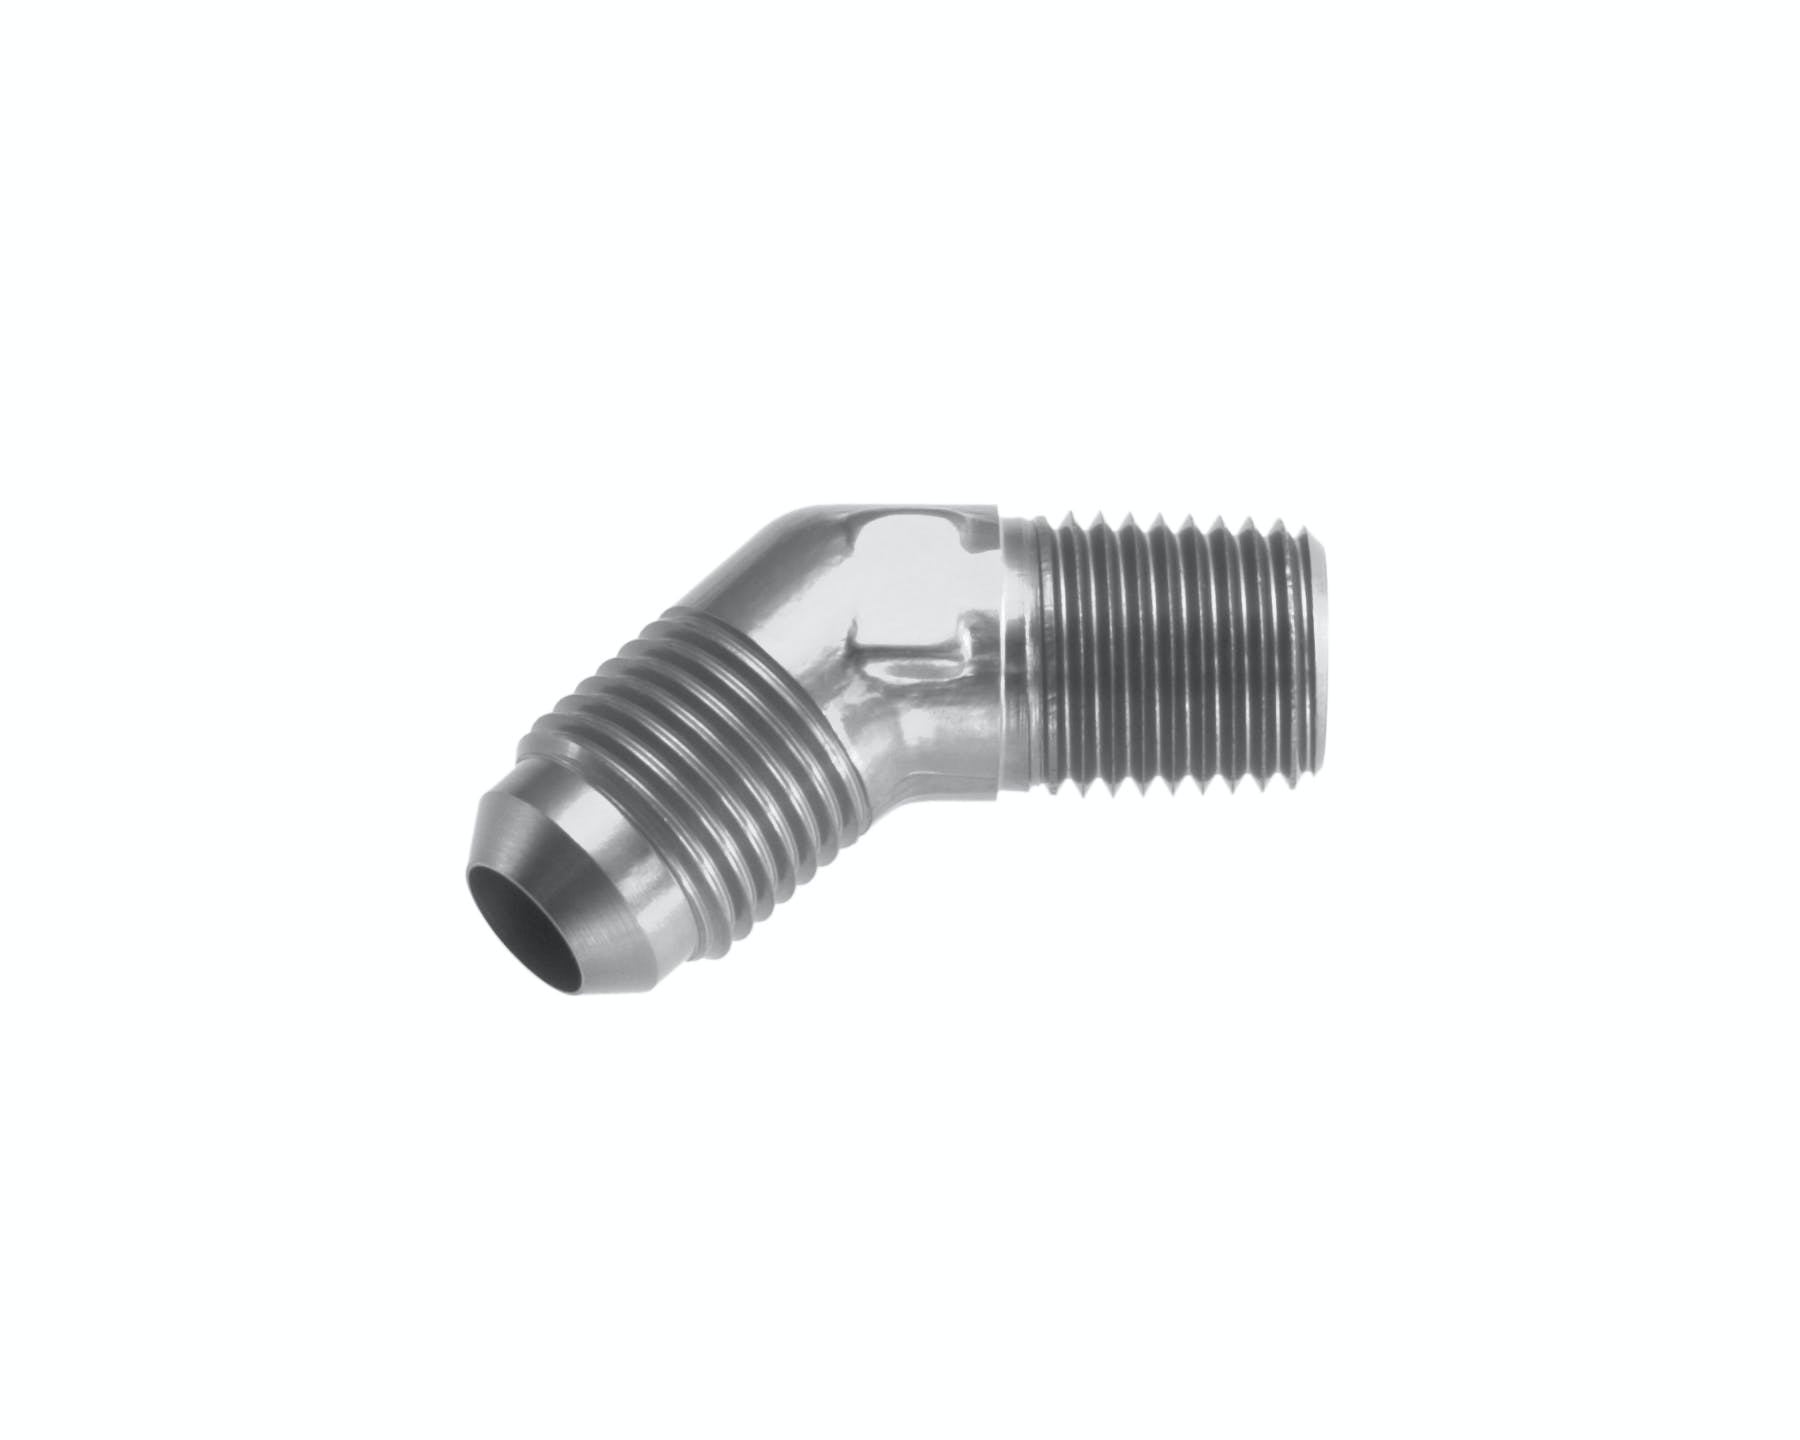 Redhorse Performance 823-04-04-5 -04 45 degree Male adapter to -04 (1/4in) NPT Male - clear